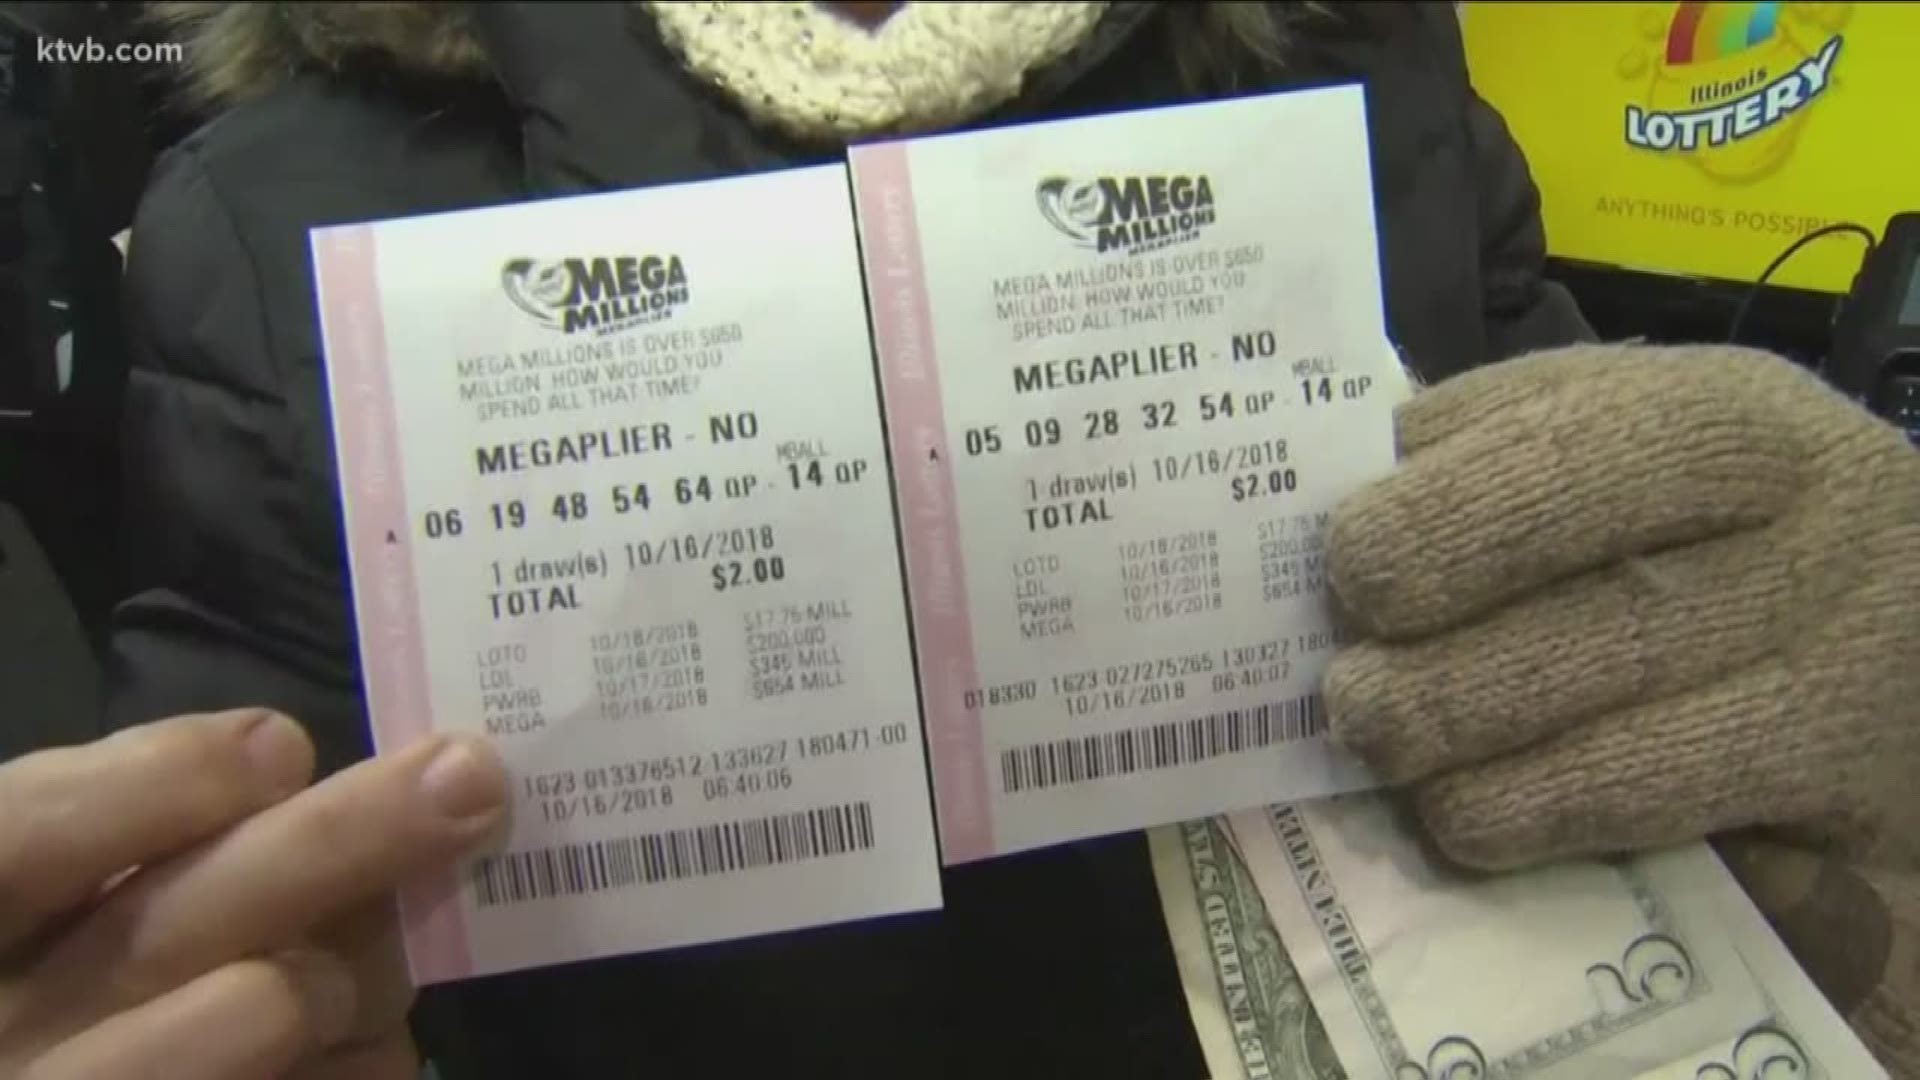 The jackpot has soared to $1 billion for Friday night's drawing.